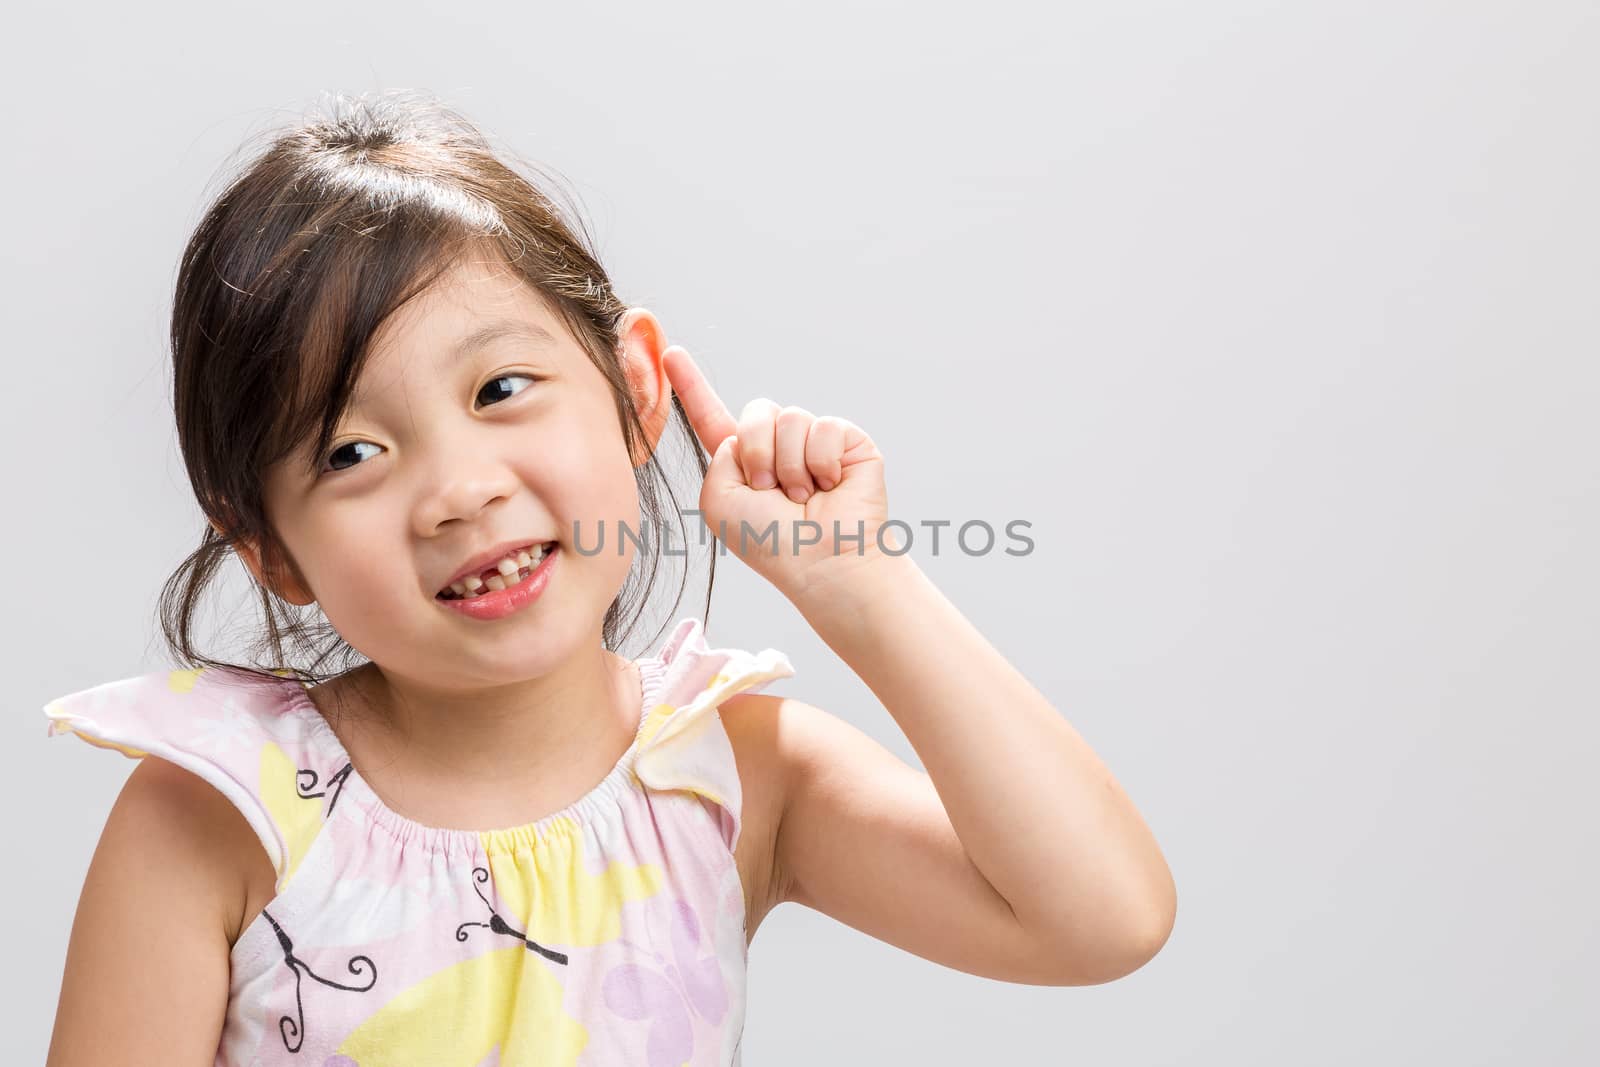 Cute Asian girl expressing smart concept, studio isolated white background.